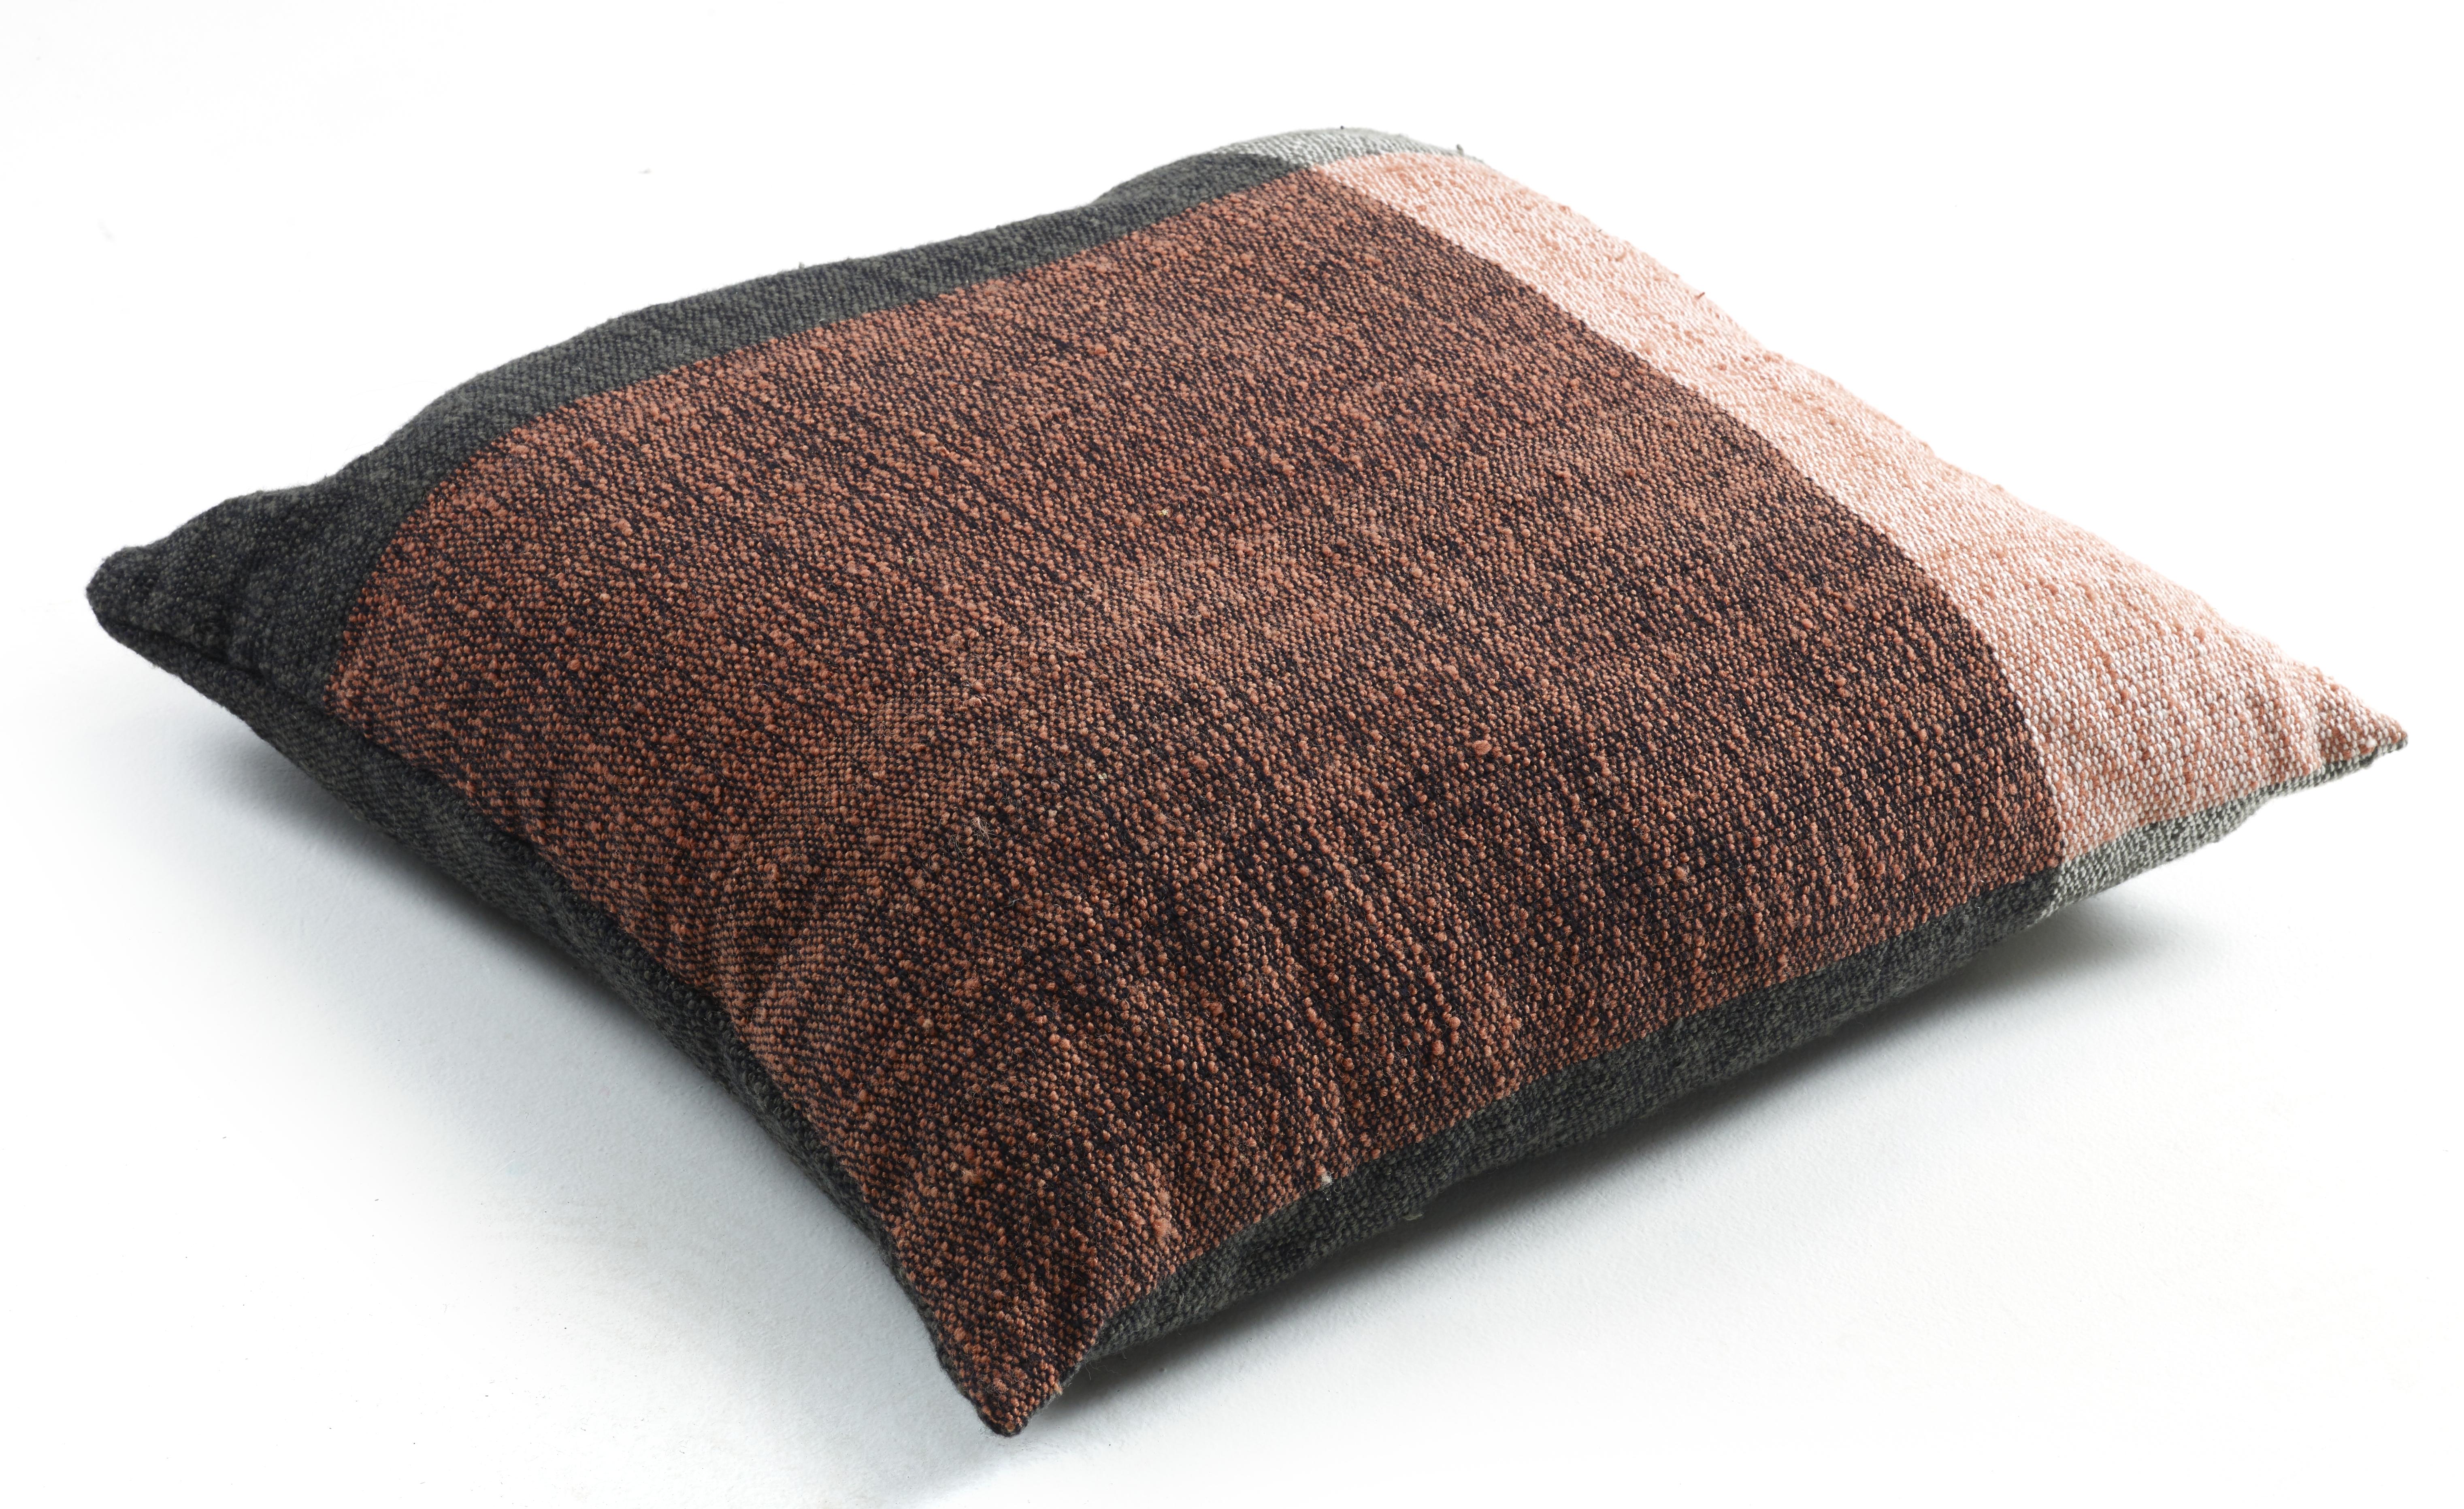 Large Nobsa cushion by Sebastian Herkner
Materials: 100% natural virgin wool. 
Technique: Hand-woven in Colombia. 
Dimensions: W 80 x H 80 cm 
Available in colors: grey/ grey/ cream, grey/ ochre/ cream, red/ ochre/ cream, blue/ mint/ cream, rose/